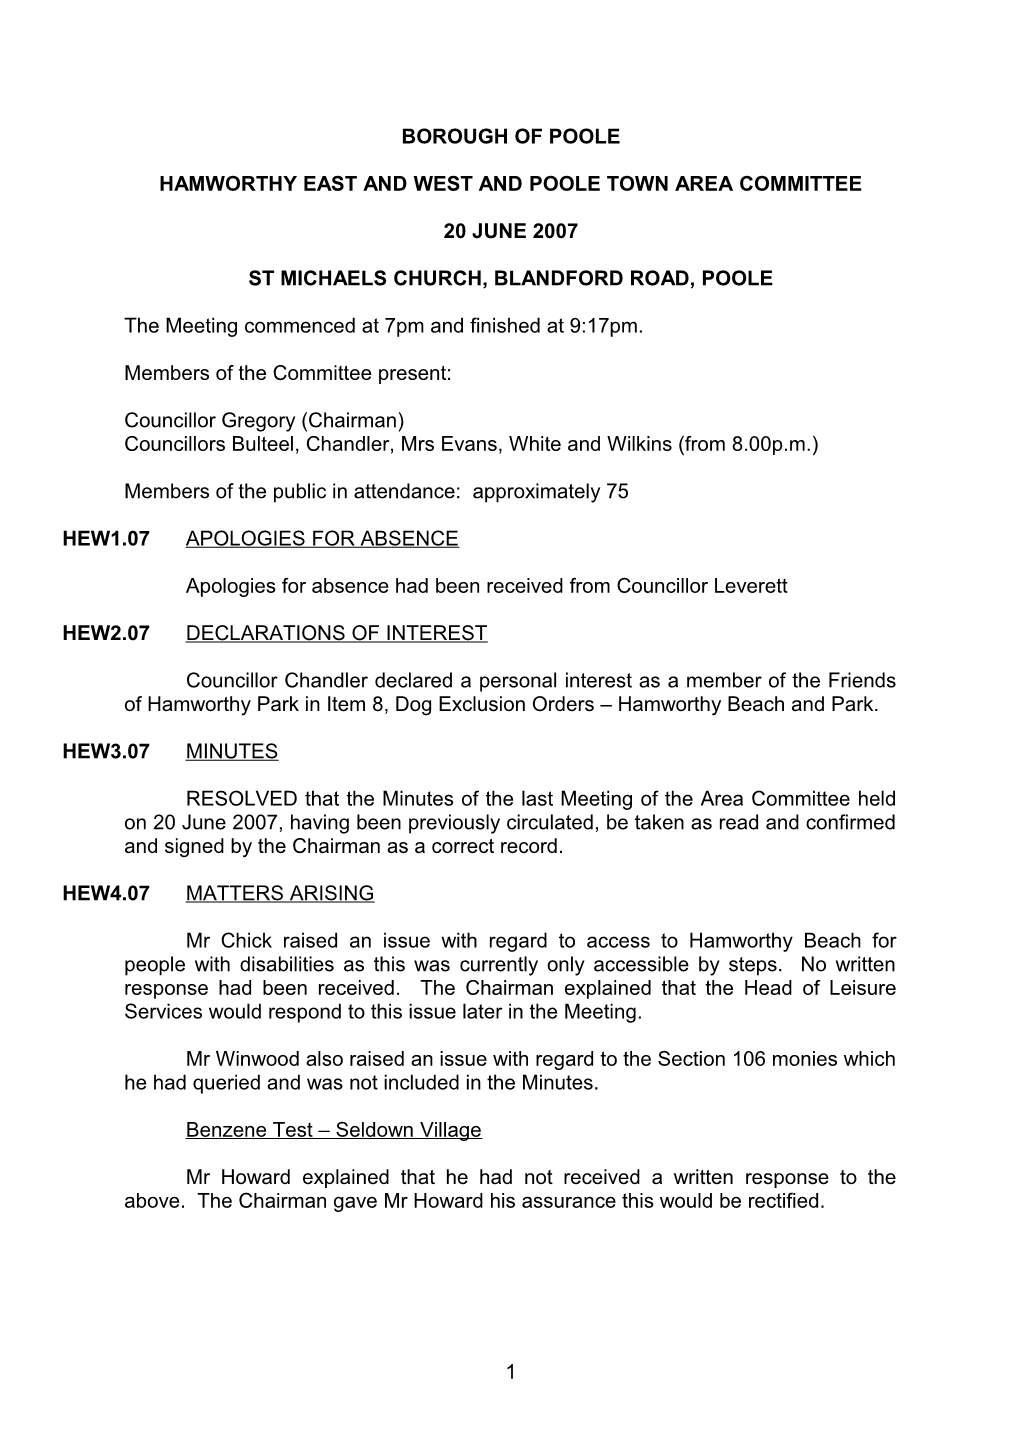 Minutes - Hamworthy East and West and Poole Town Area Committee - 20 June 2007